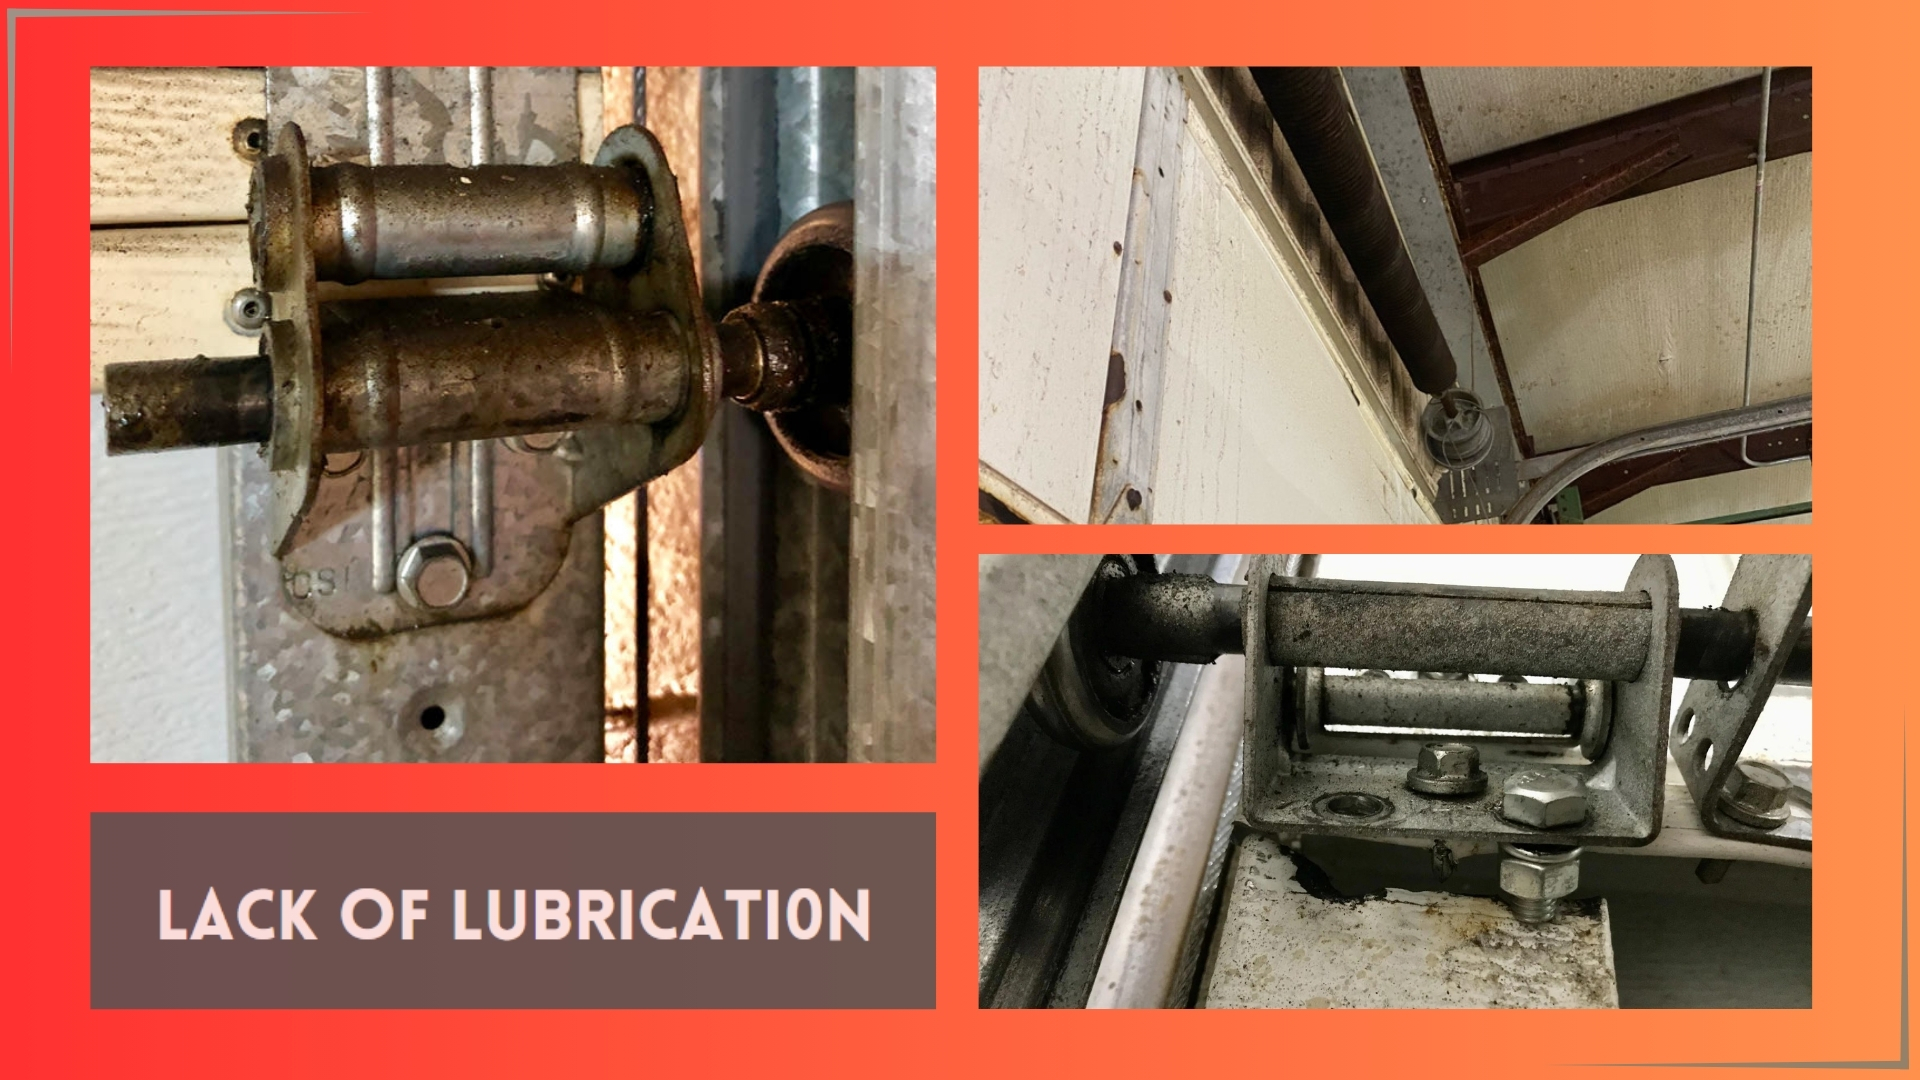 Lack of lubrication is one of the causes of squeaky garage doors